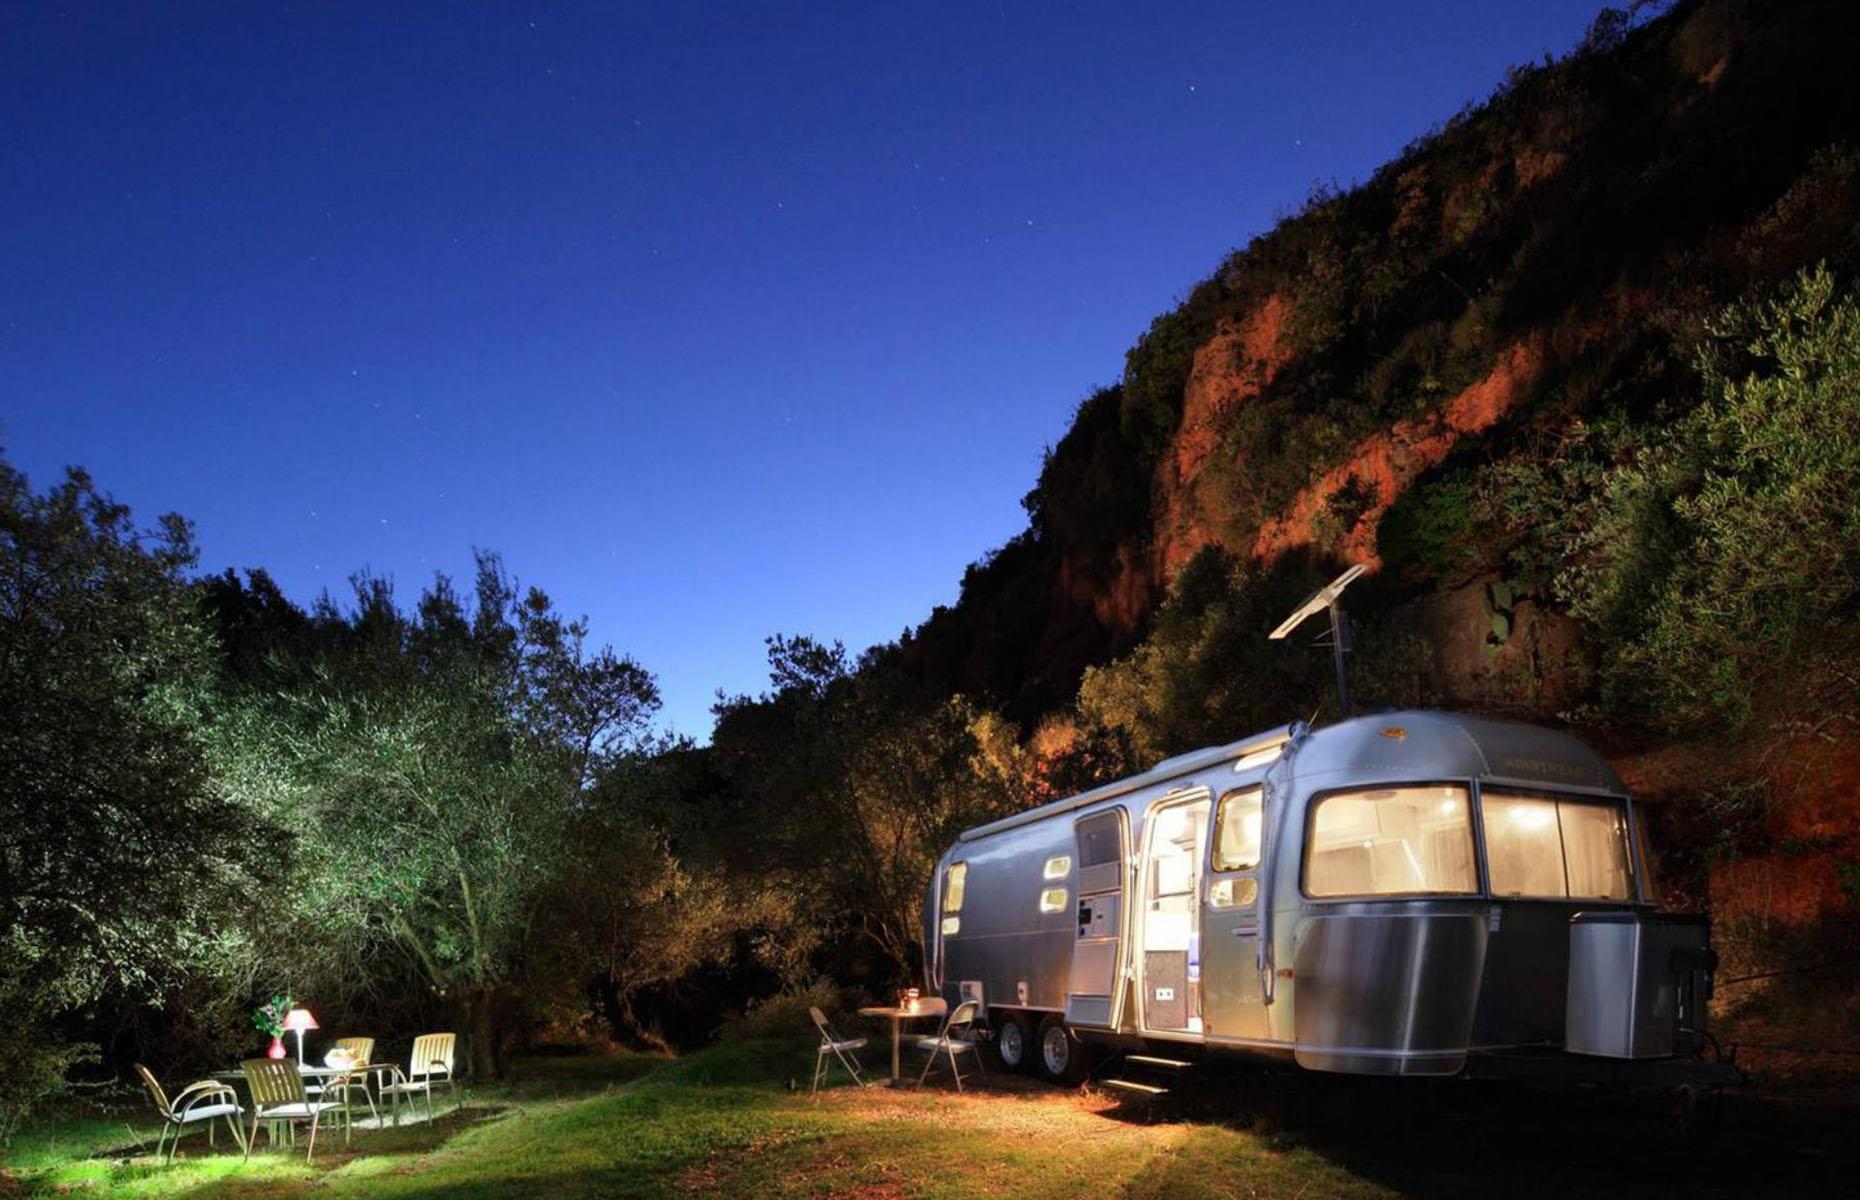 <p>First built in 1929, Airstreams have changed the way we travel and experience the world. With their distinctive aluminium exteriors and retro shapes, they are instantly recognisable and offer a cool and comfortable way to vacation. </p>  <p><strong>Click through the gallery to see a selection of stylish Airstreams that take glamping to the next level...</strong></p>